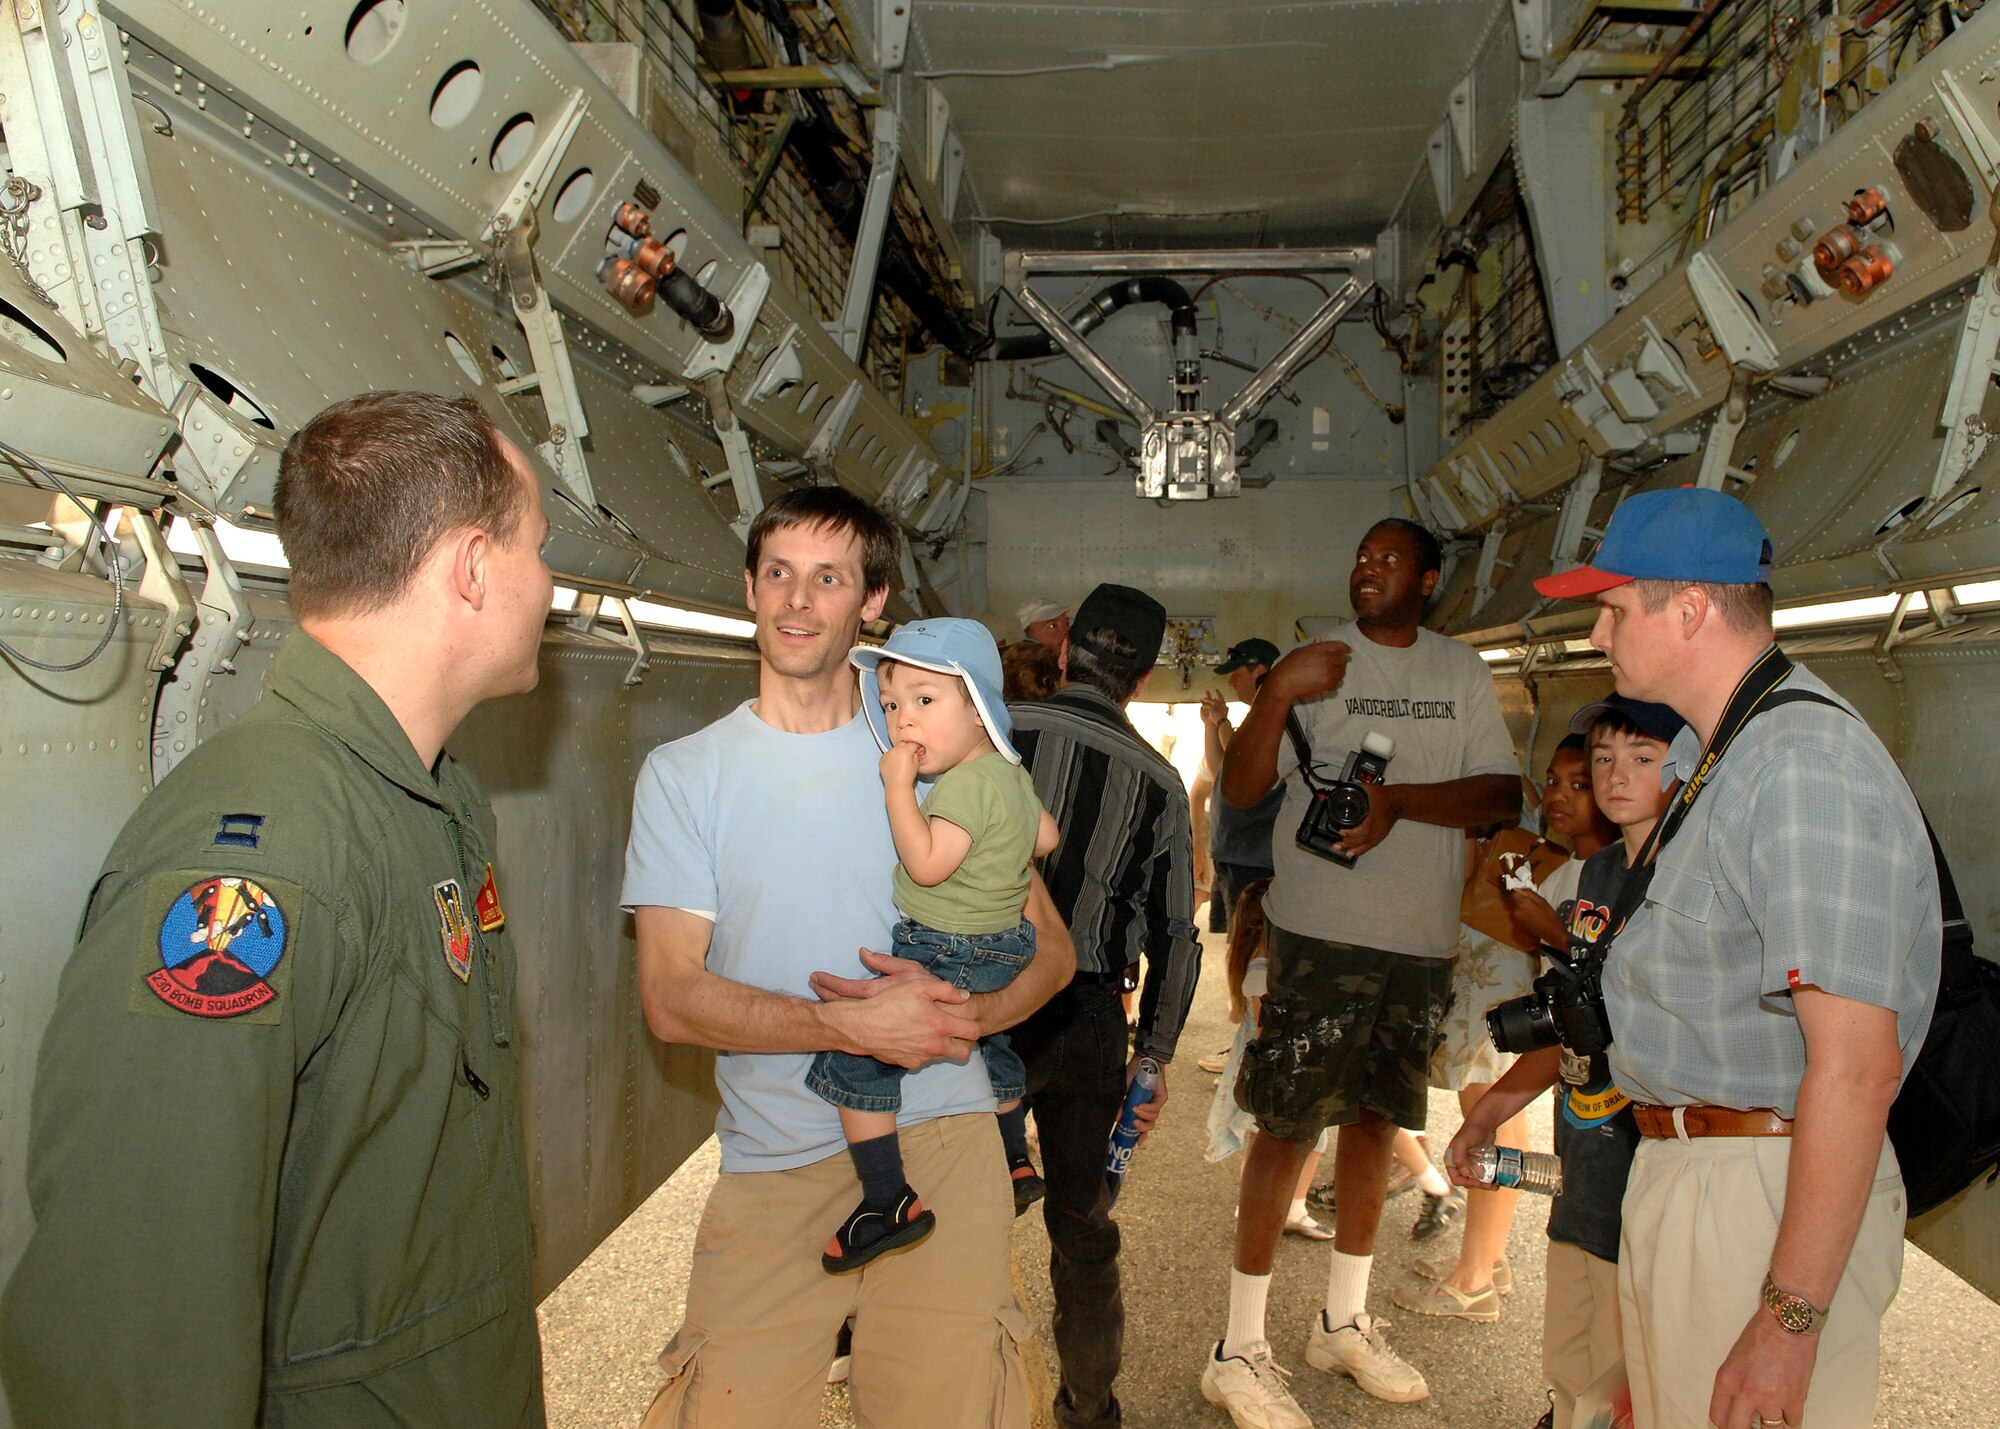 U.S. Air Force Captain Jarred Prier an Electronic Warfare Officer with the 23d Bomb Squadron, Minot Air Force Base, North Dakota talks to visitors in the bomb bay of an B52H bomber during Wings Over Long Beach at the Long Beach Airport, November 15, 2008.  (U.S. Air Force photo by Senior Airman Matthew Smith)